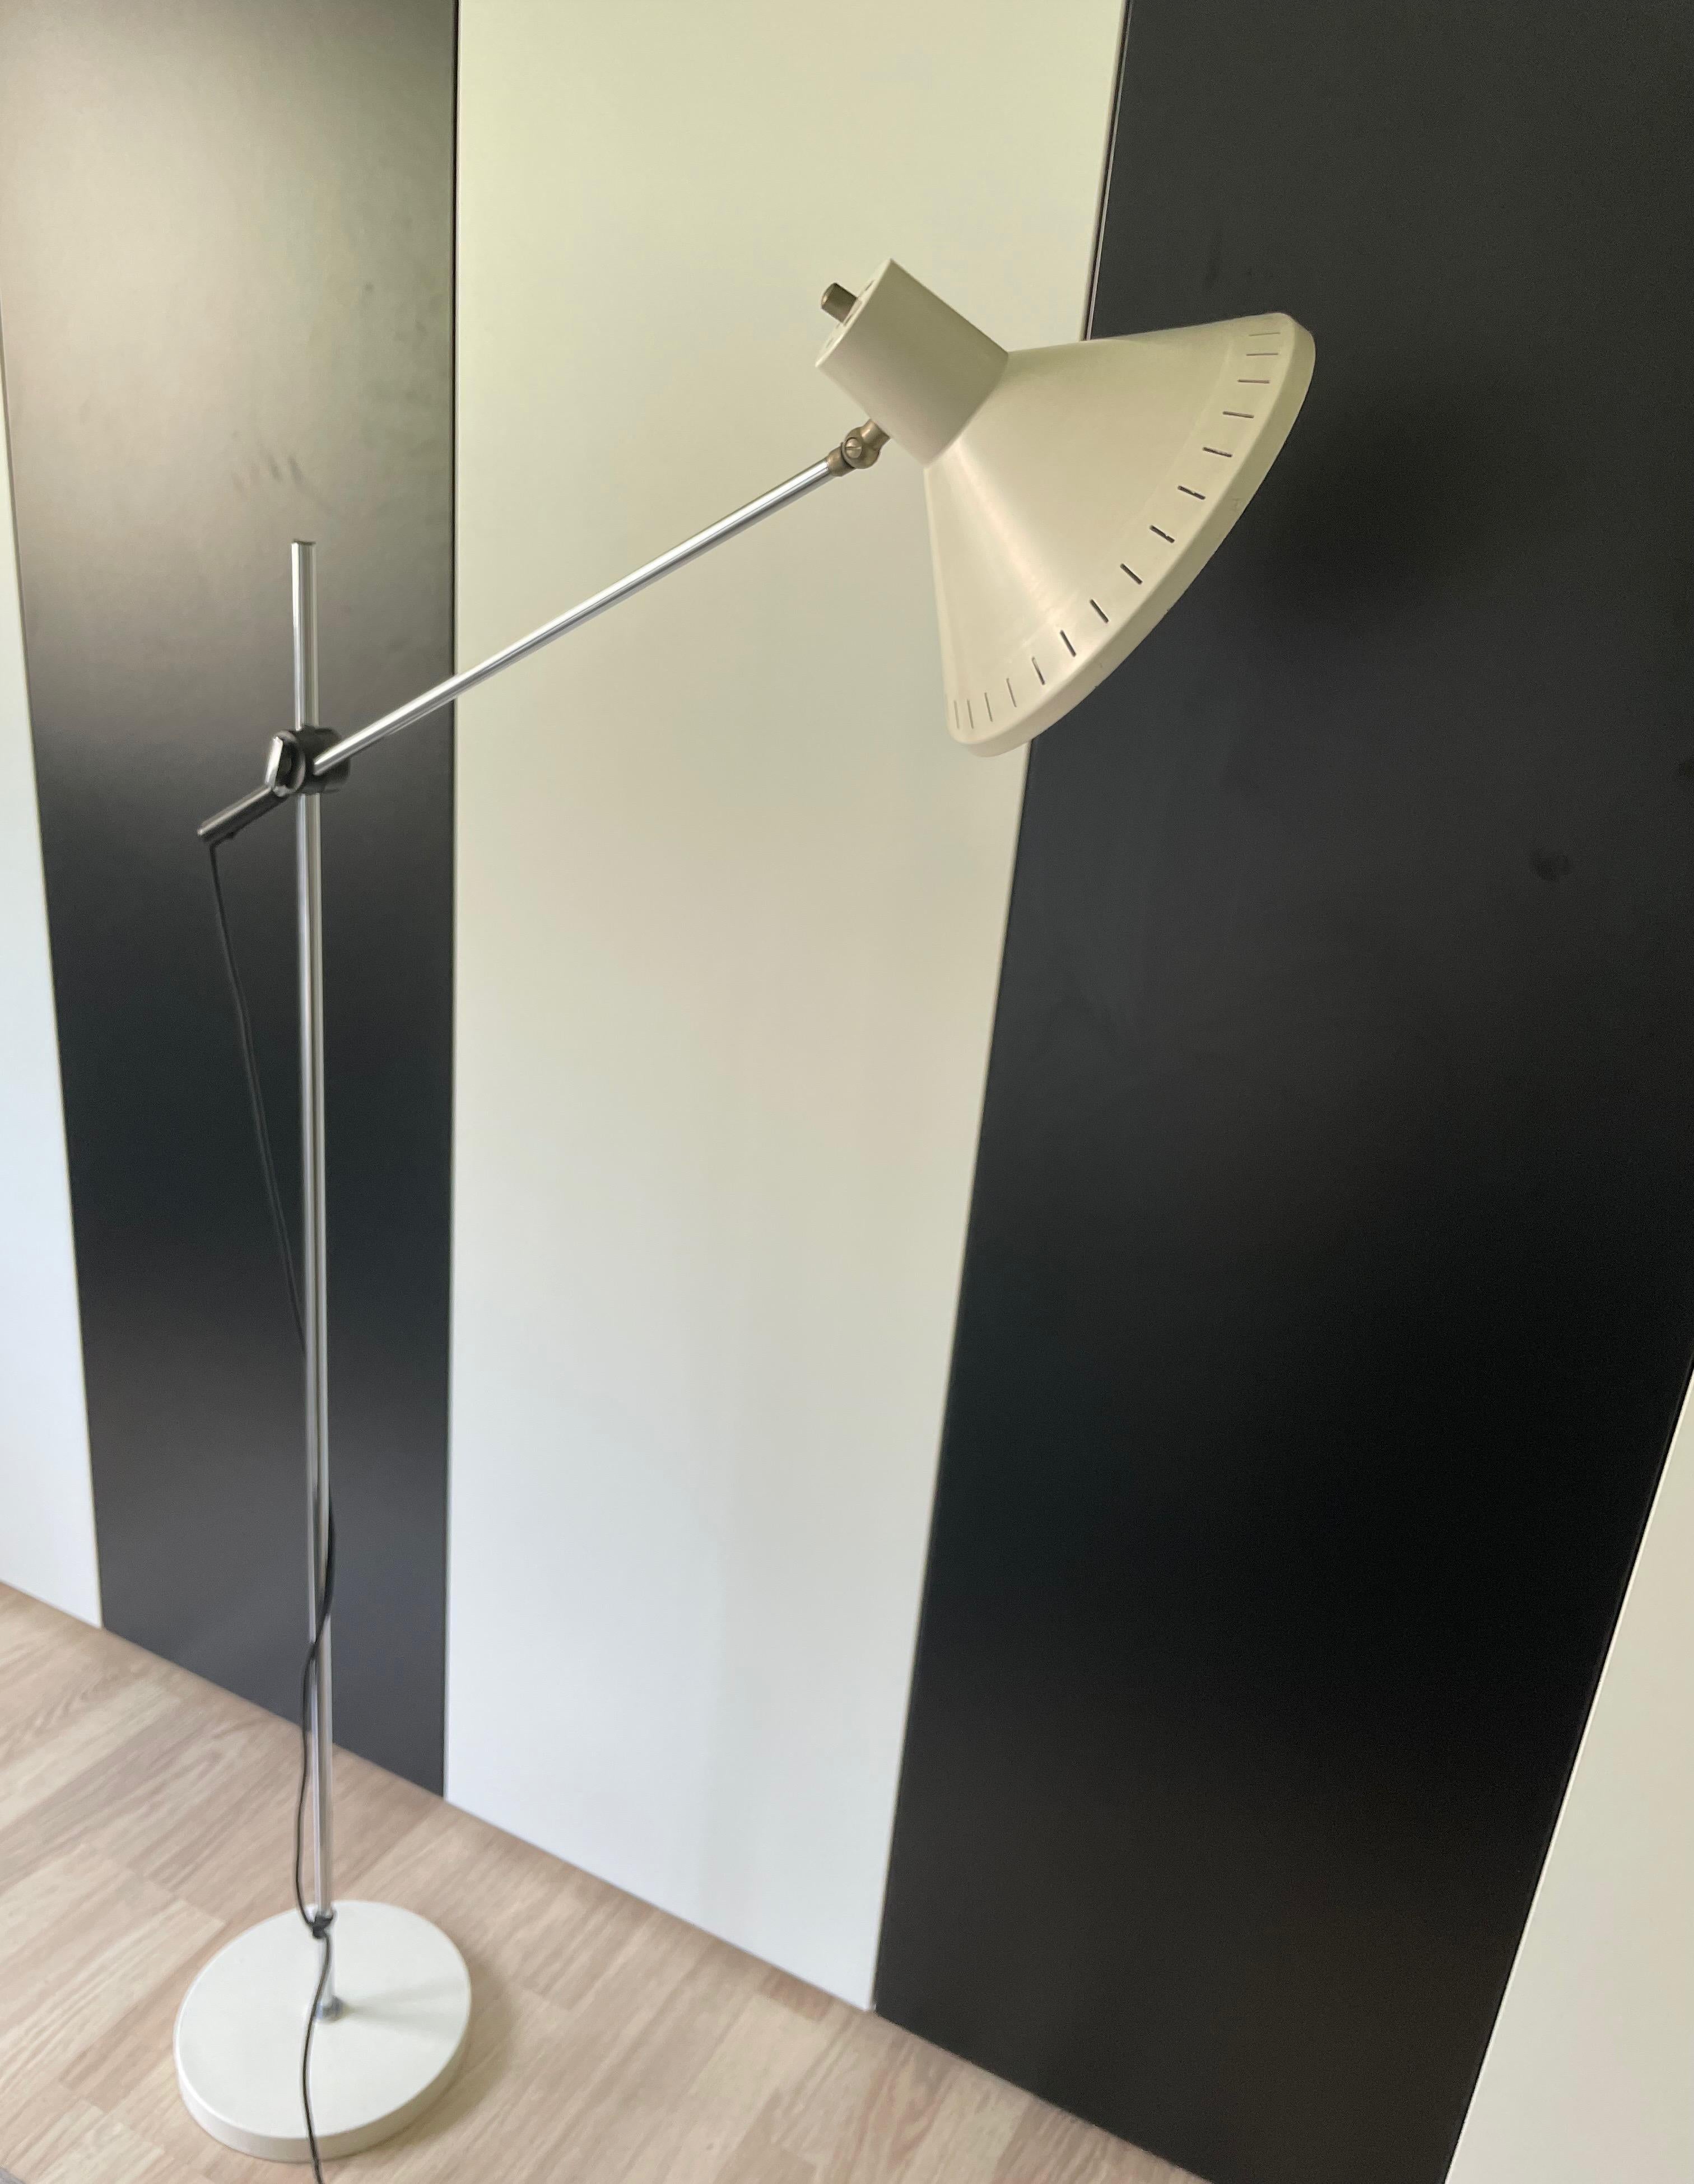 Minimalist adjustable floorlamp probably designed fof Kosack Germany.
White lacquered metal and chromed parts.
circa 1960.